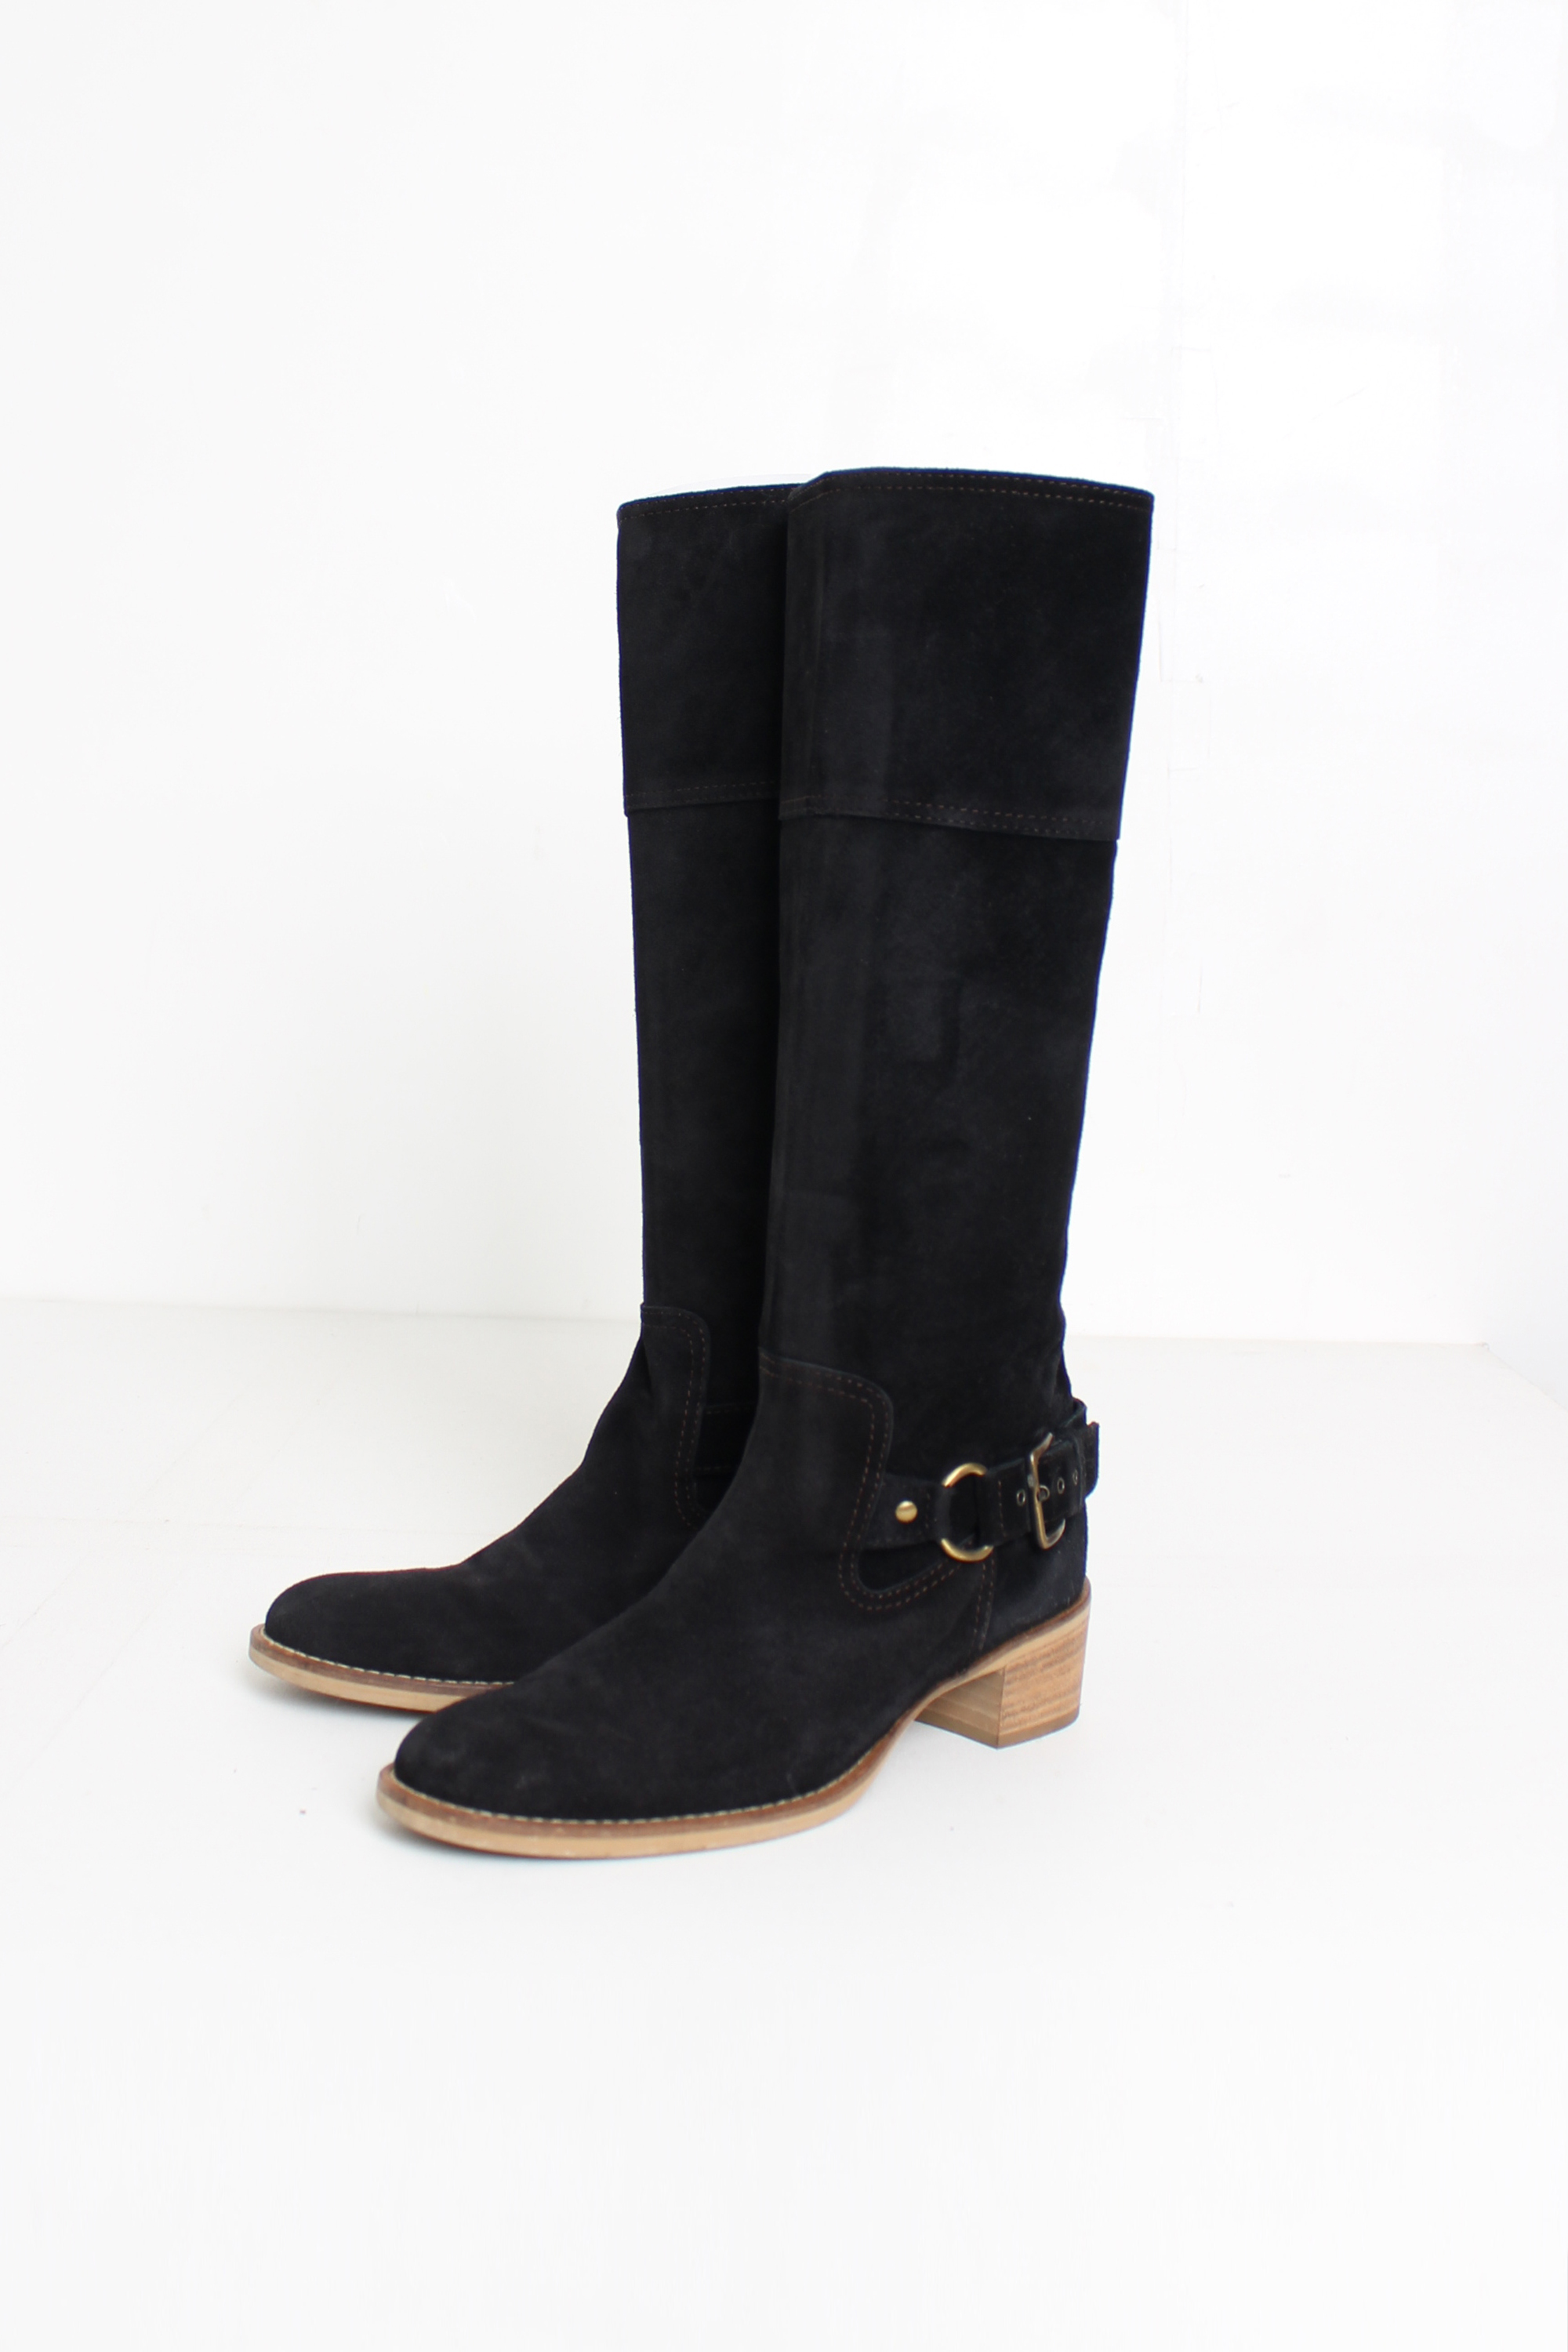 MARGARET HOWELL idea boots